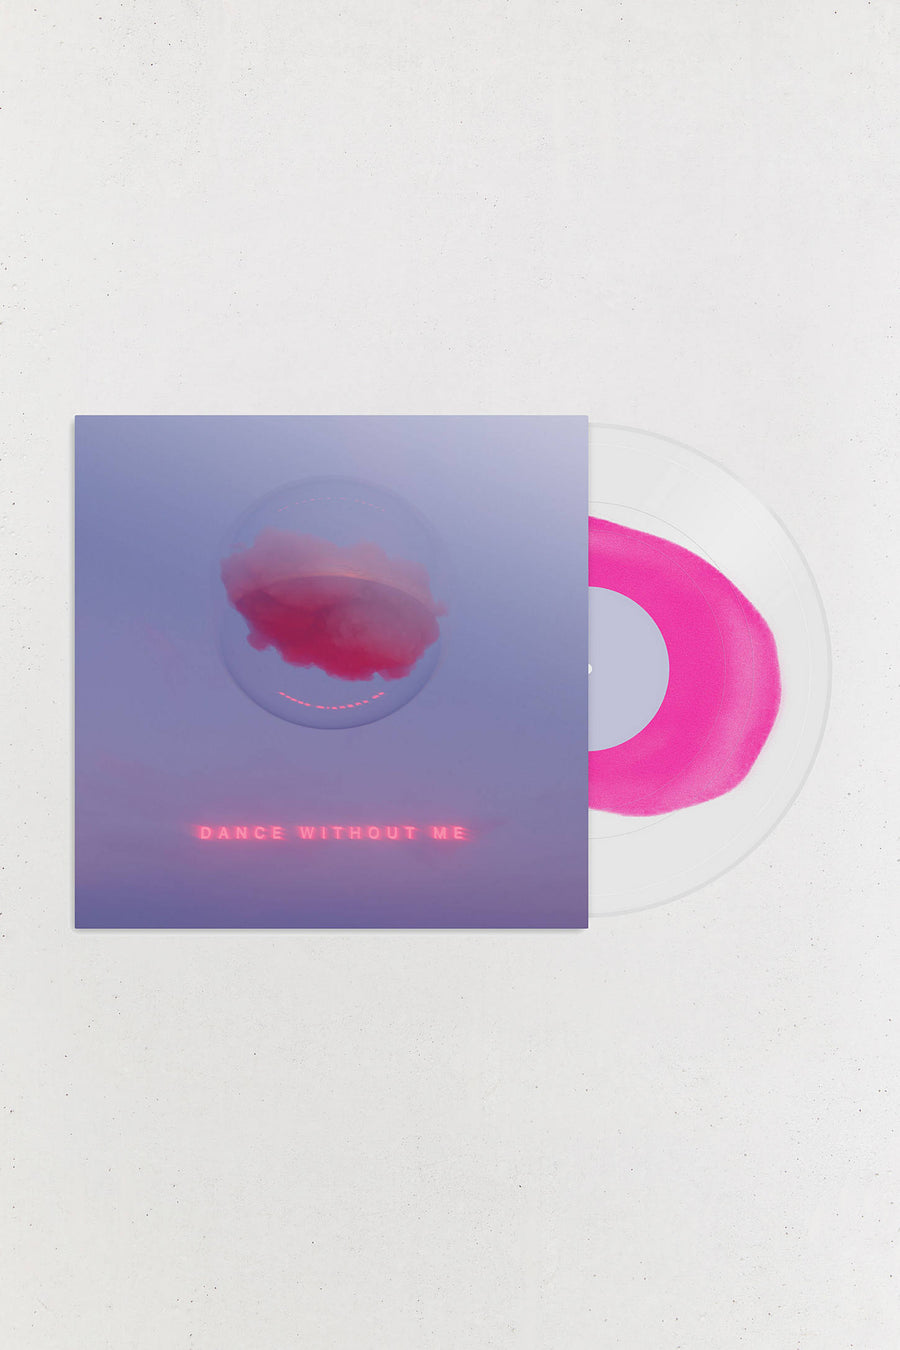 DRAMA - Dance Without Me Limited Edition Exclusive Pink Vinyl Limited #1000 [Condtion VG+/NM]